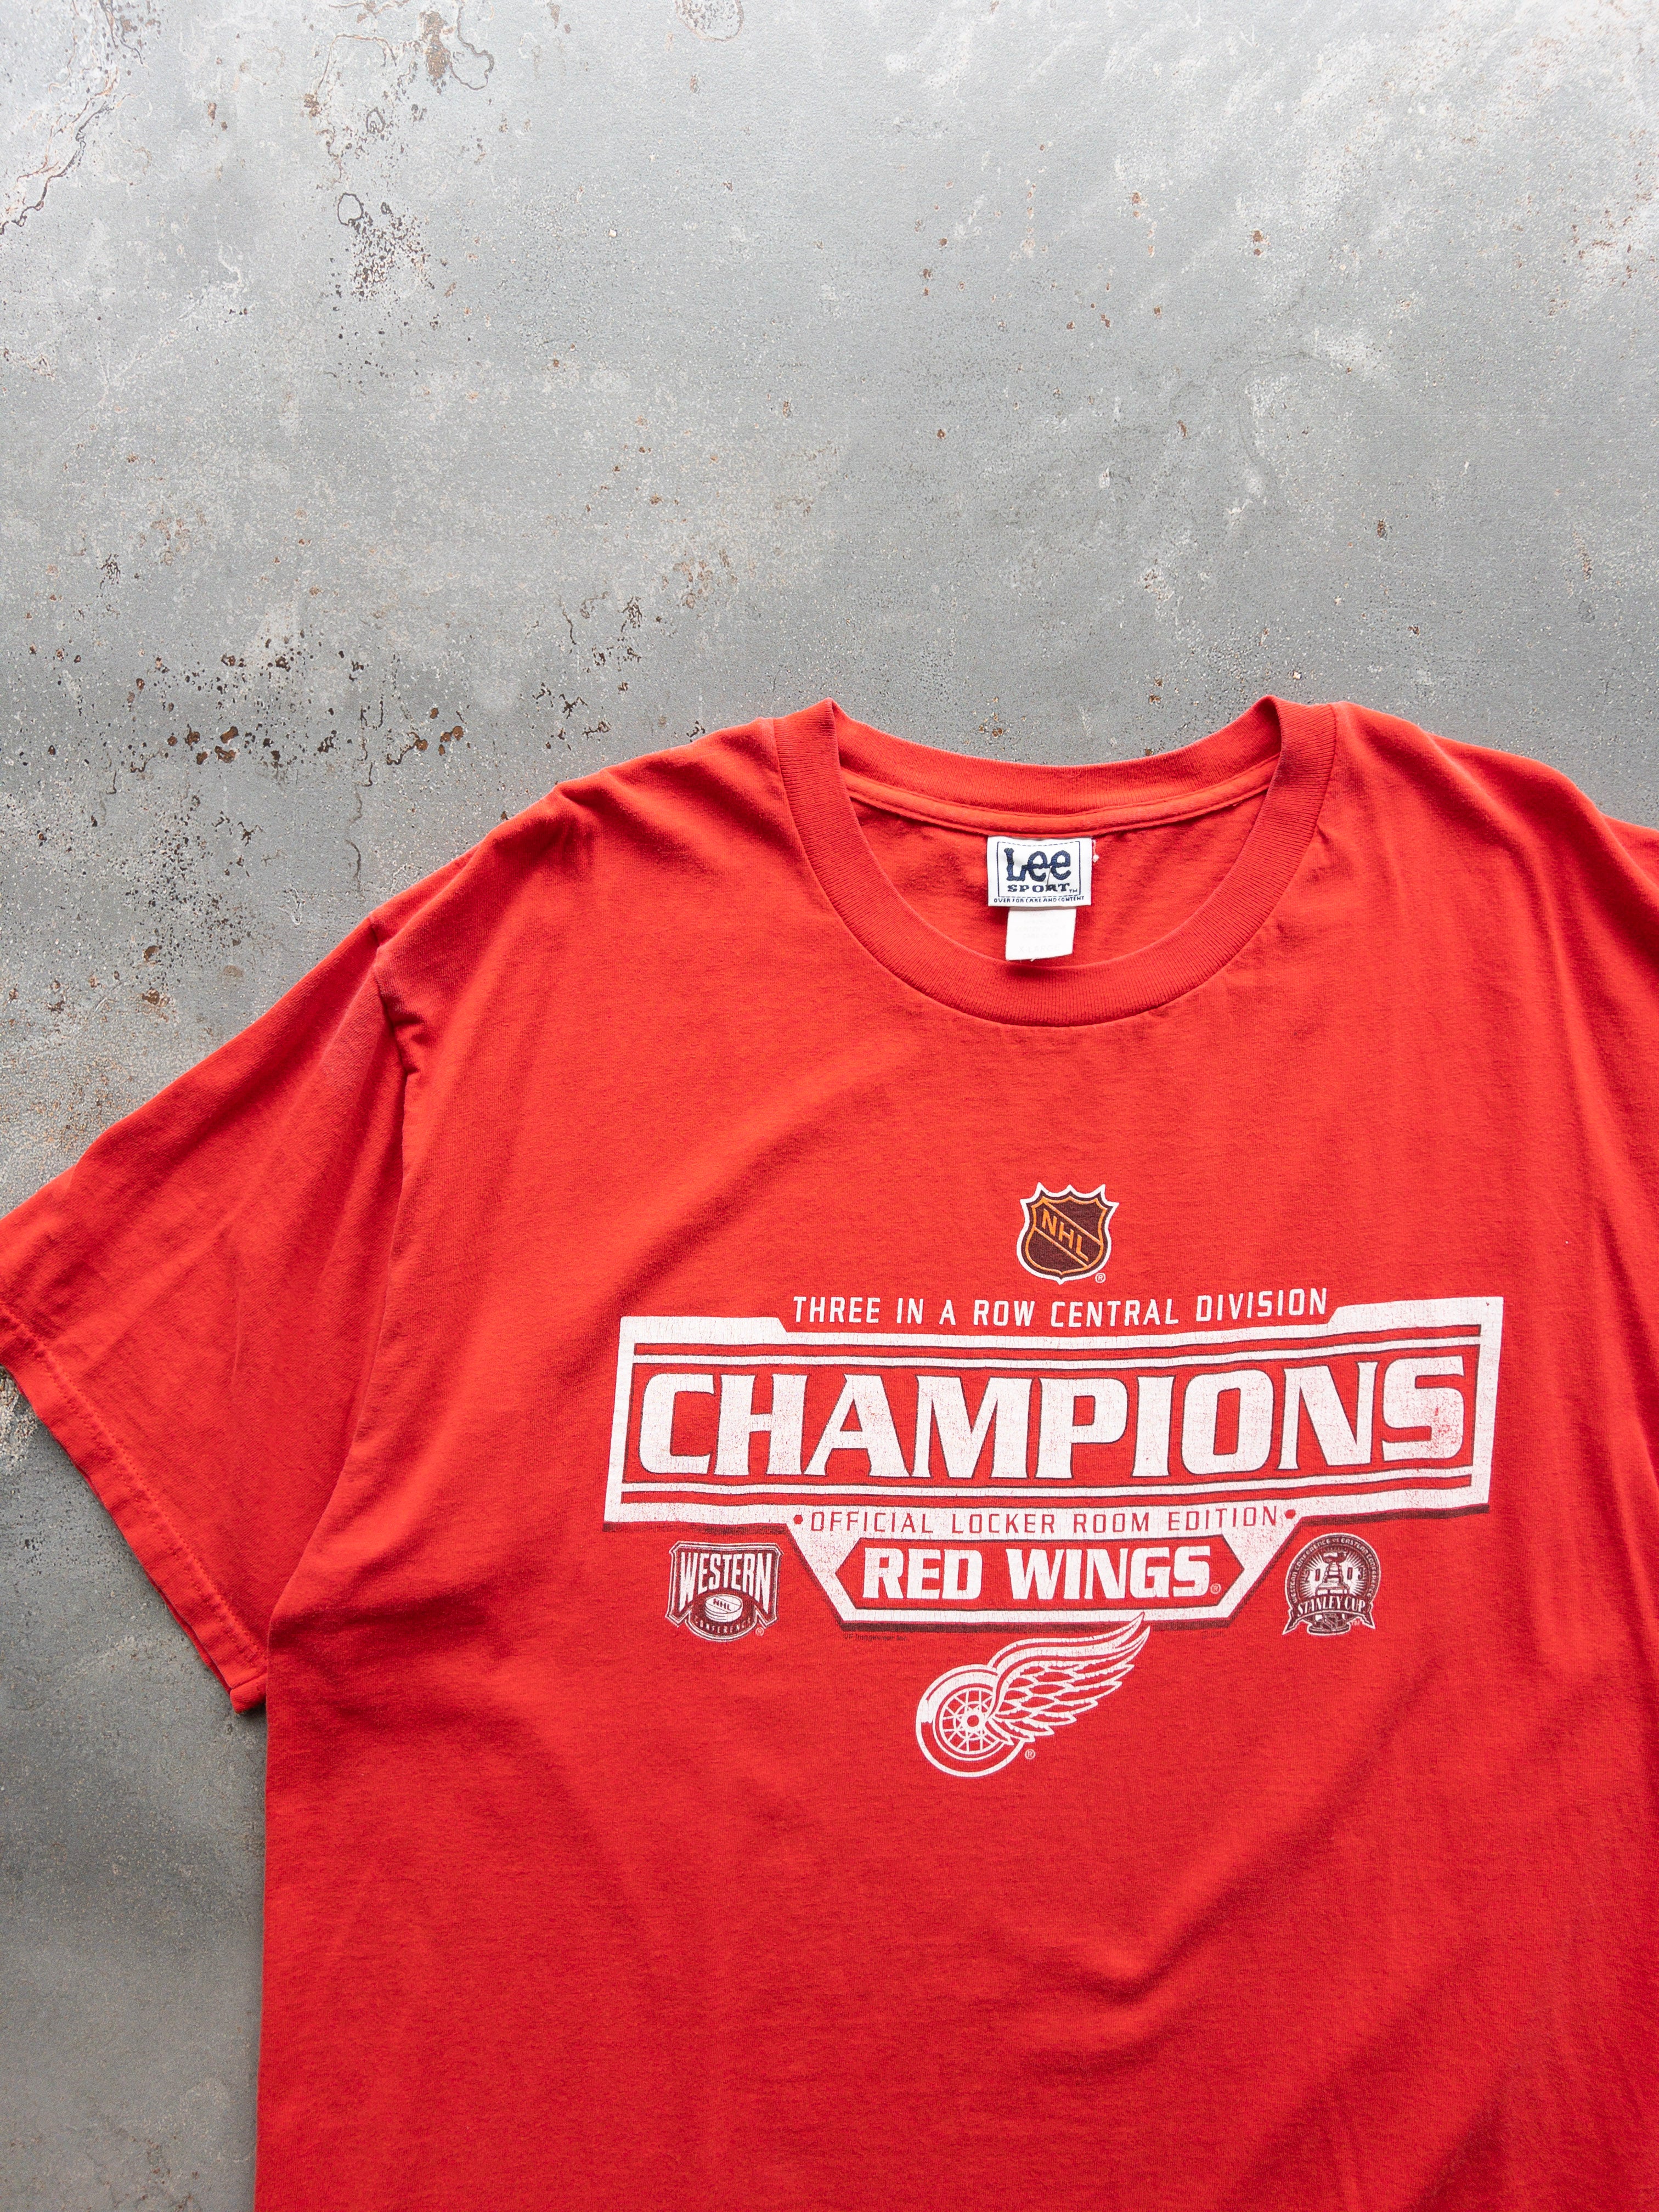 Vintage Red Wings Champs 2003 Tee (XL)